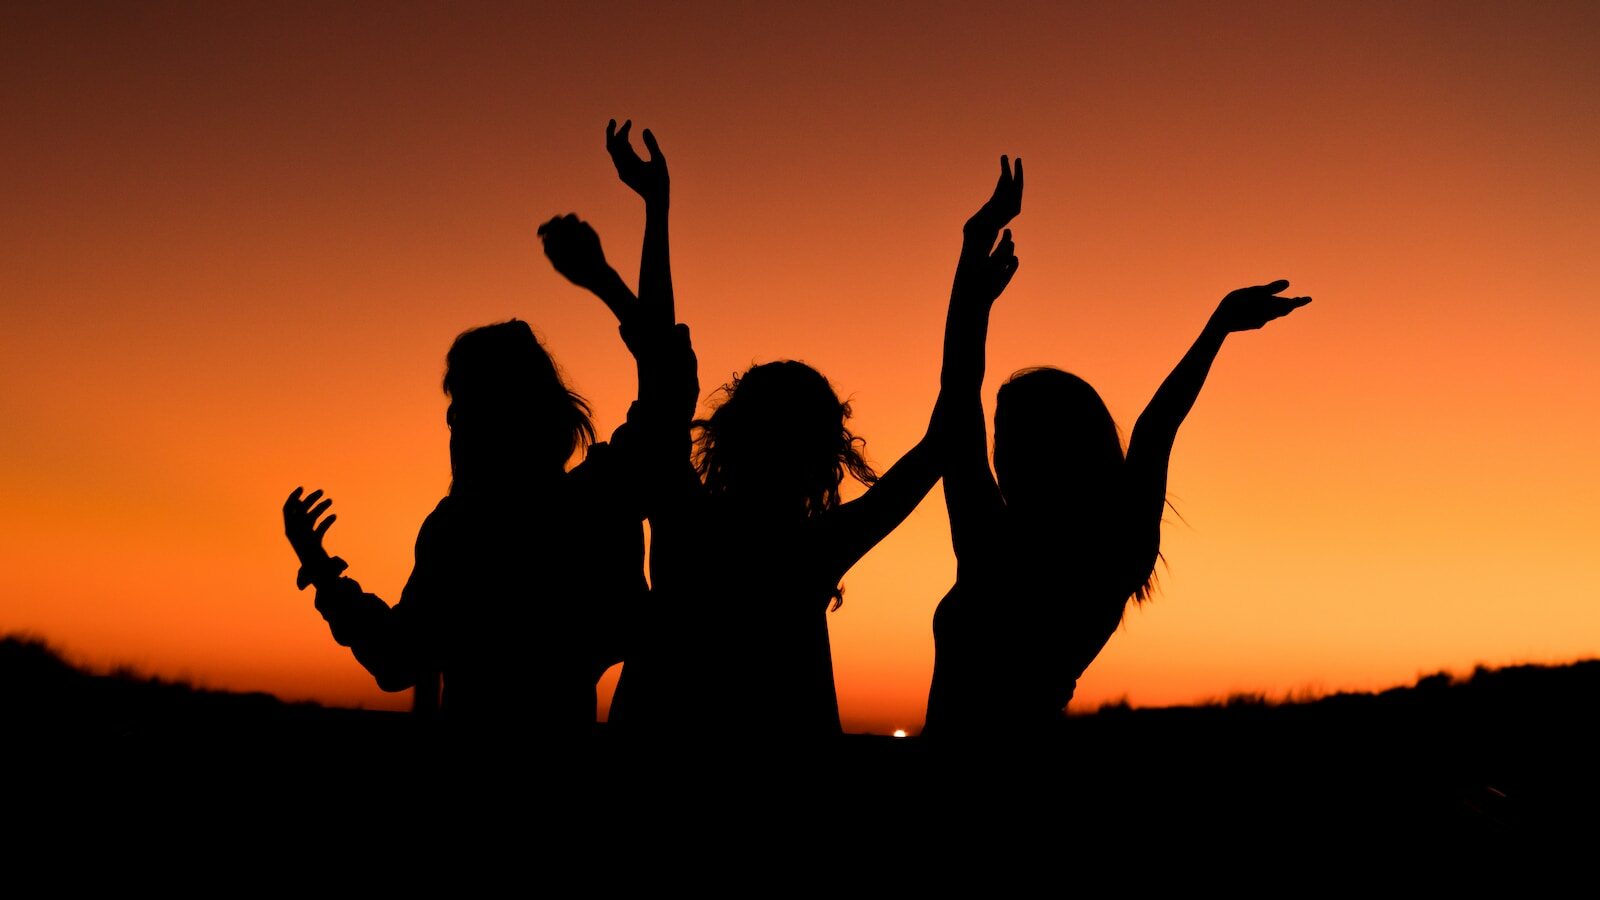 silhouette of three woman with hands on the air while dancing during sunset